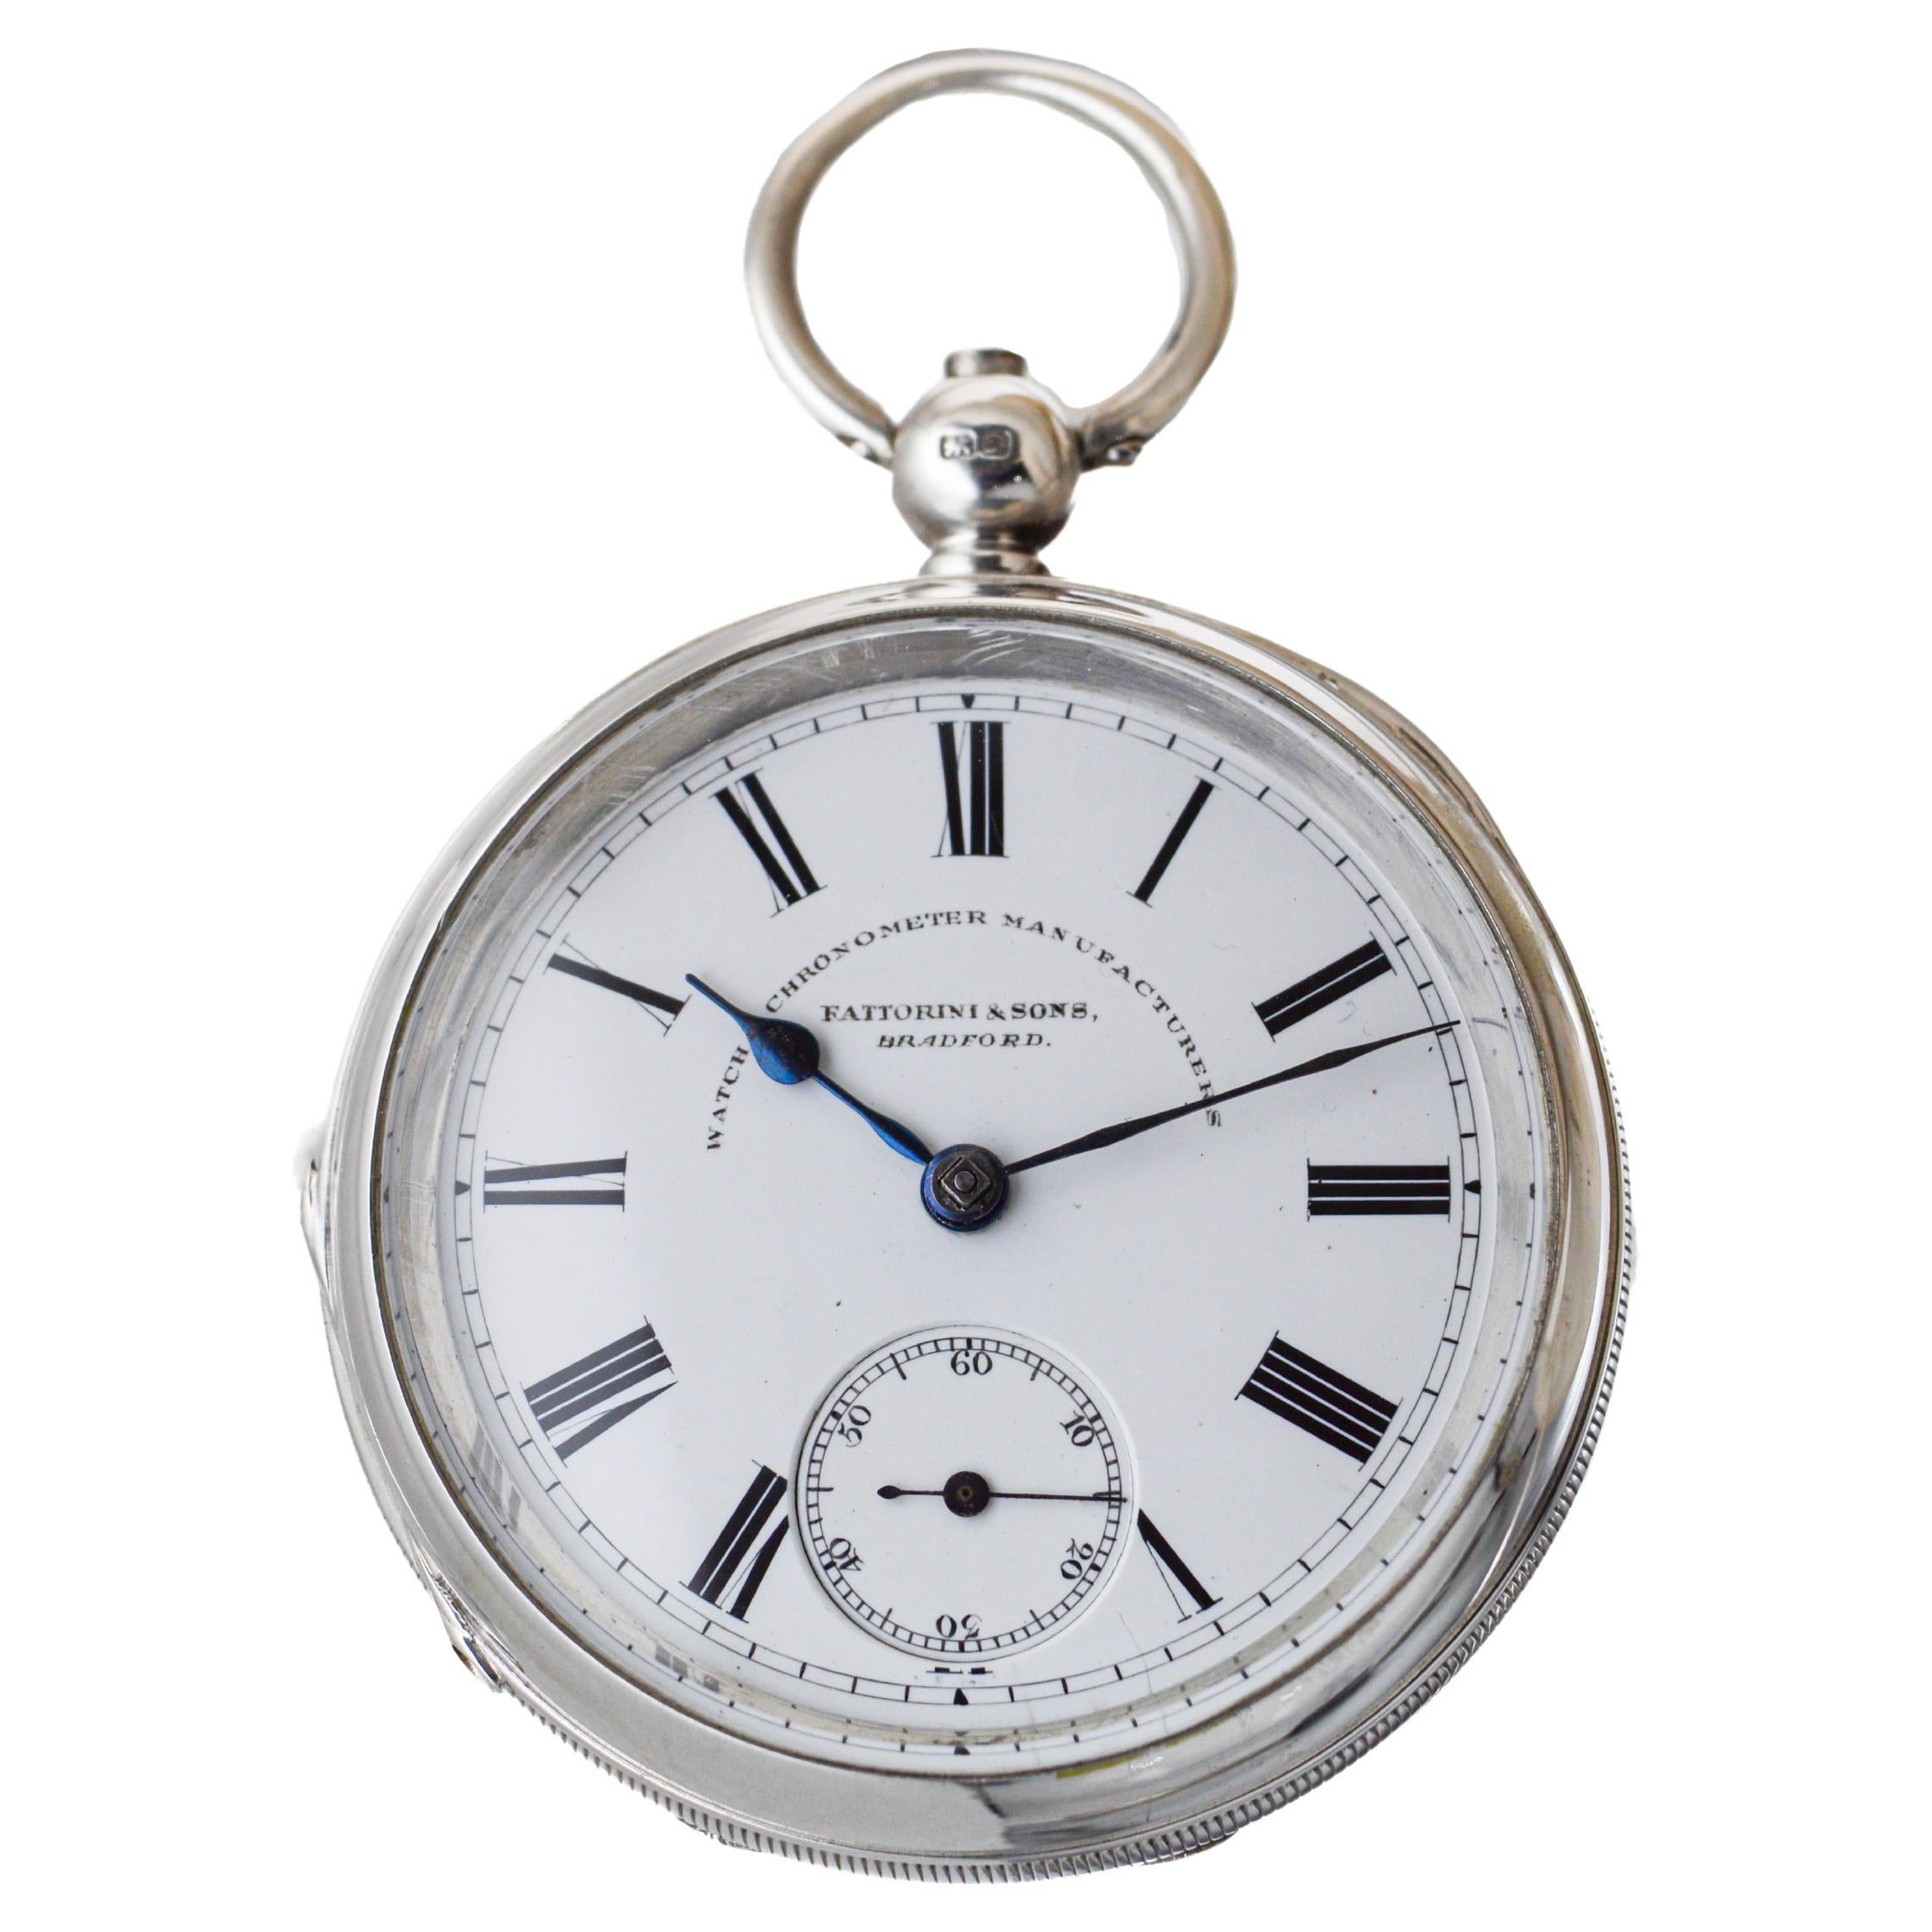 Art Deco Fattorini & Sons Silver Keywind with Original Kiln Fired Enamel Dial from 1880's For Sale